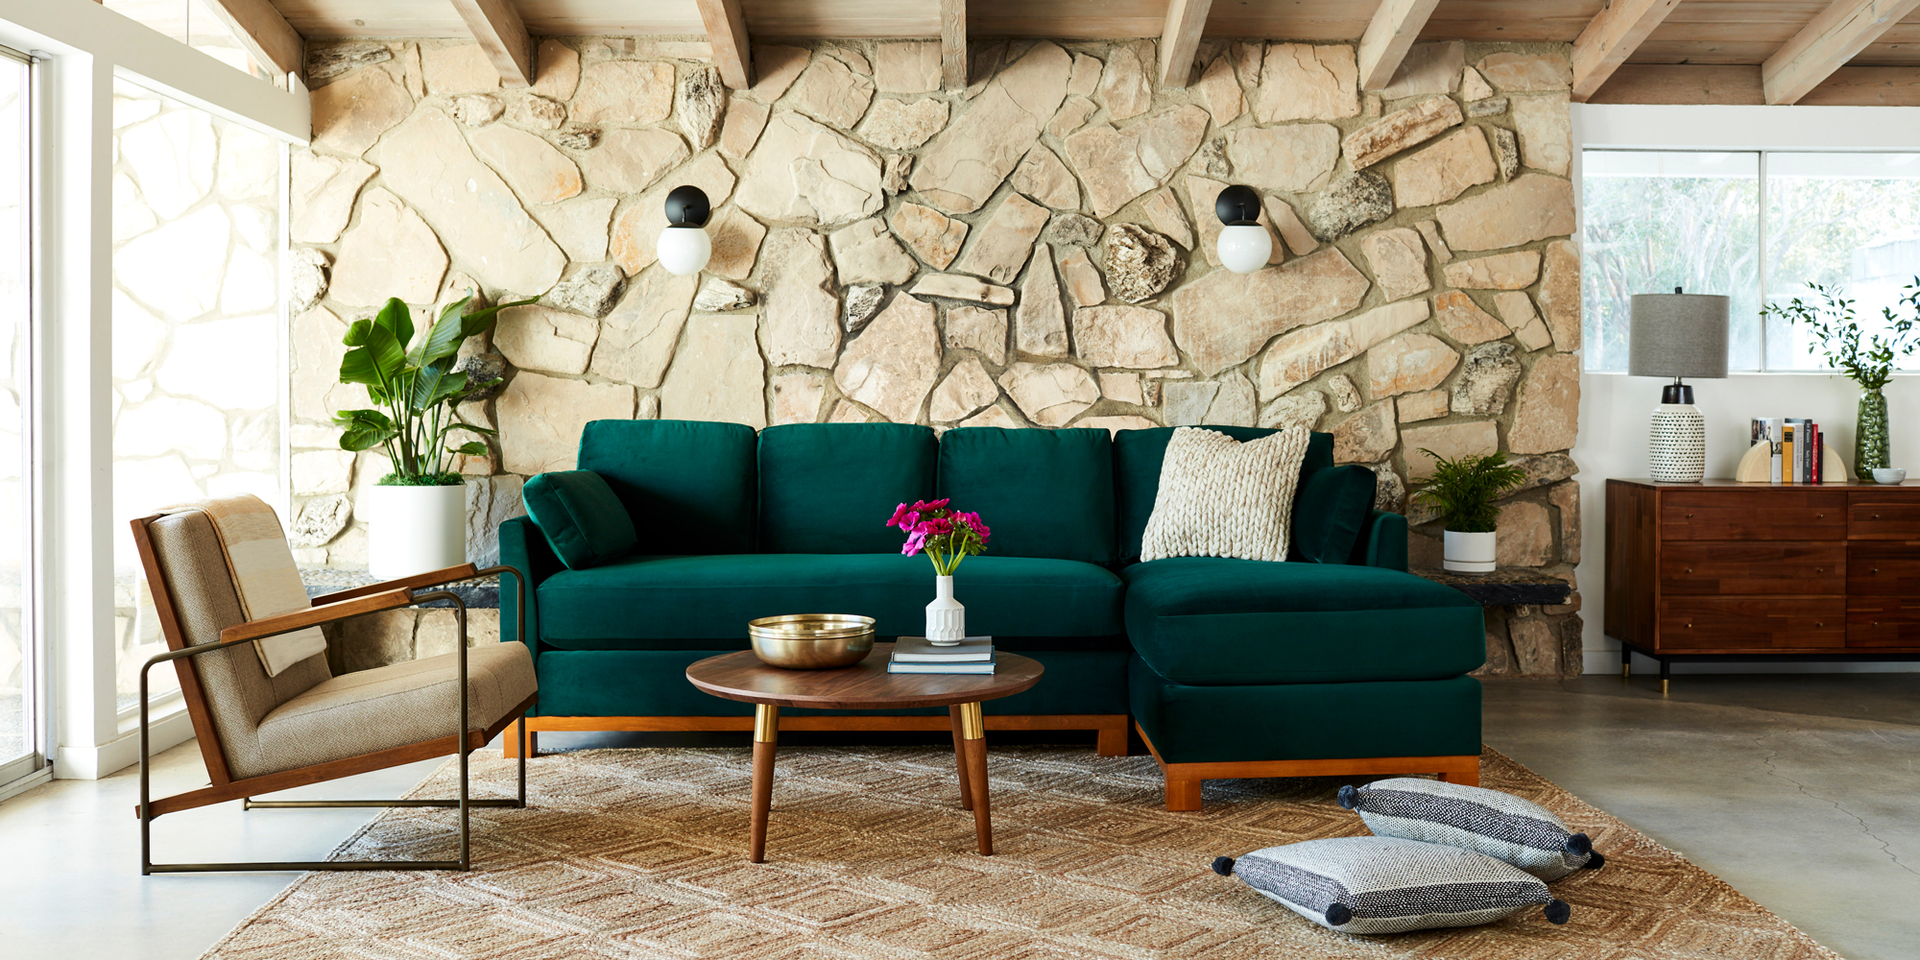 Choosing The Right Foam For Your Sofa Cushions: A Guide